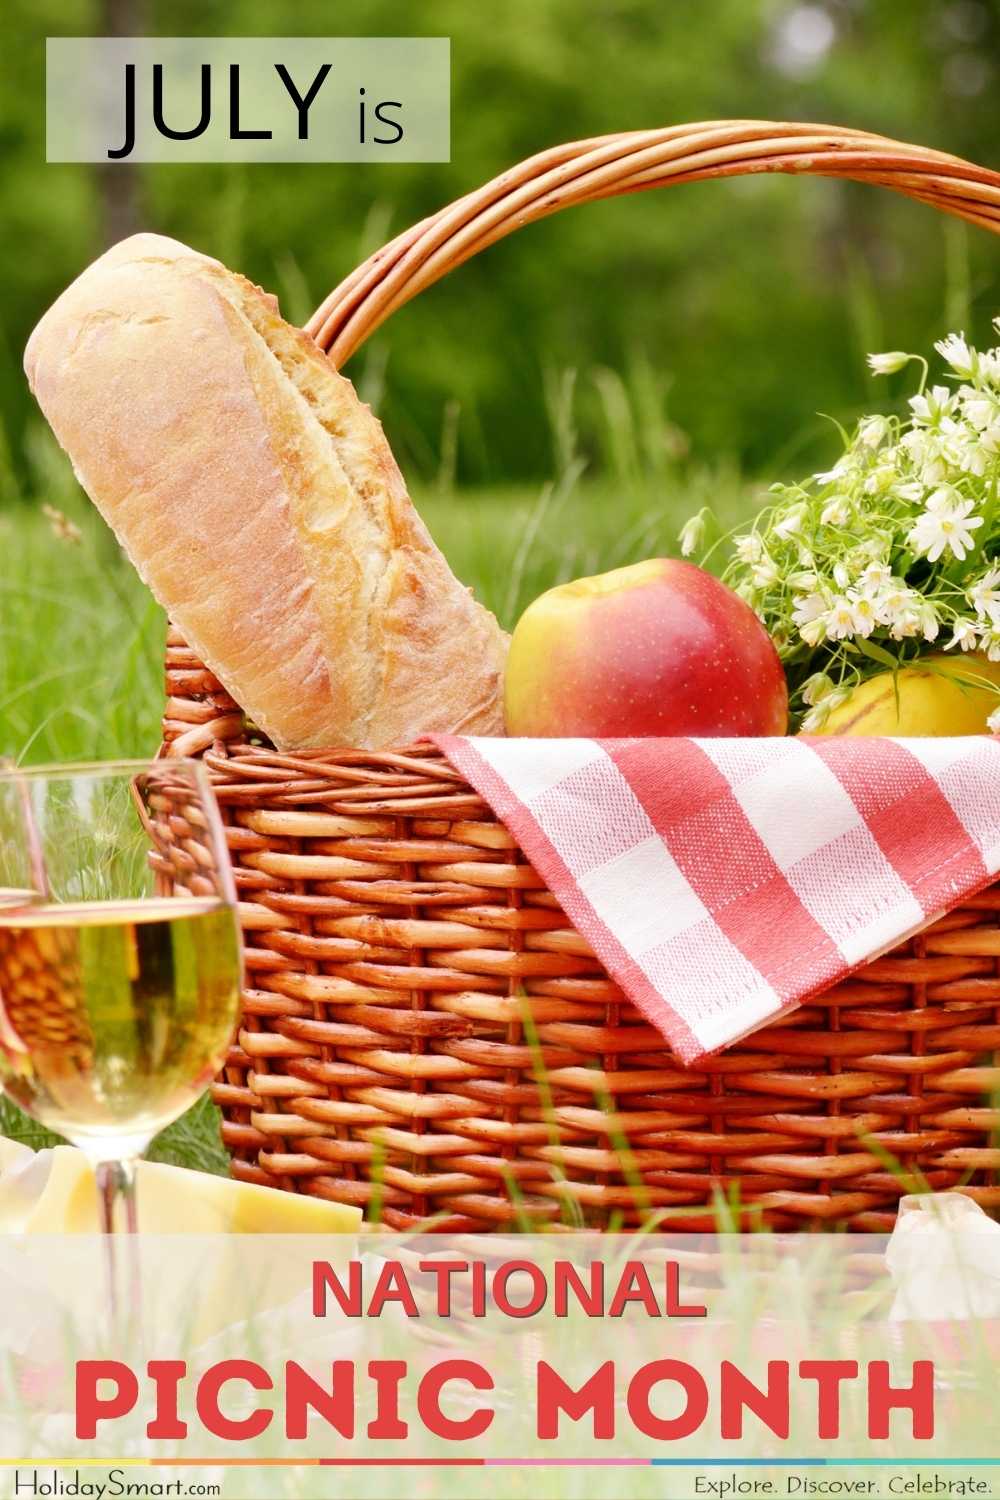 Picnic Month Holiday Smart